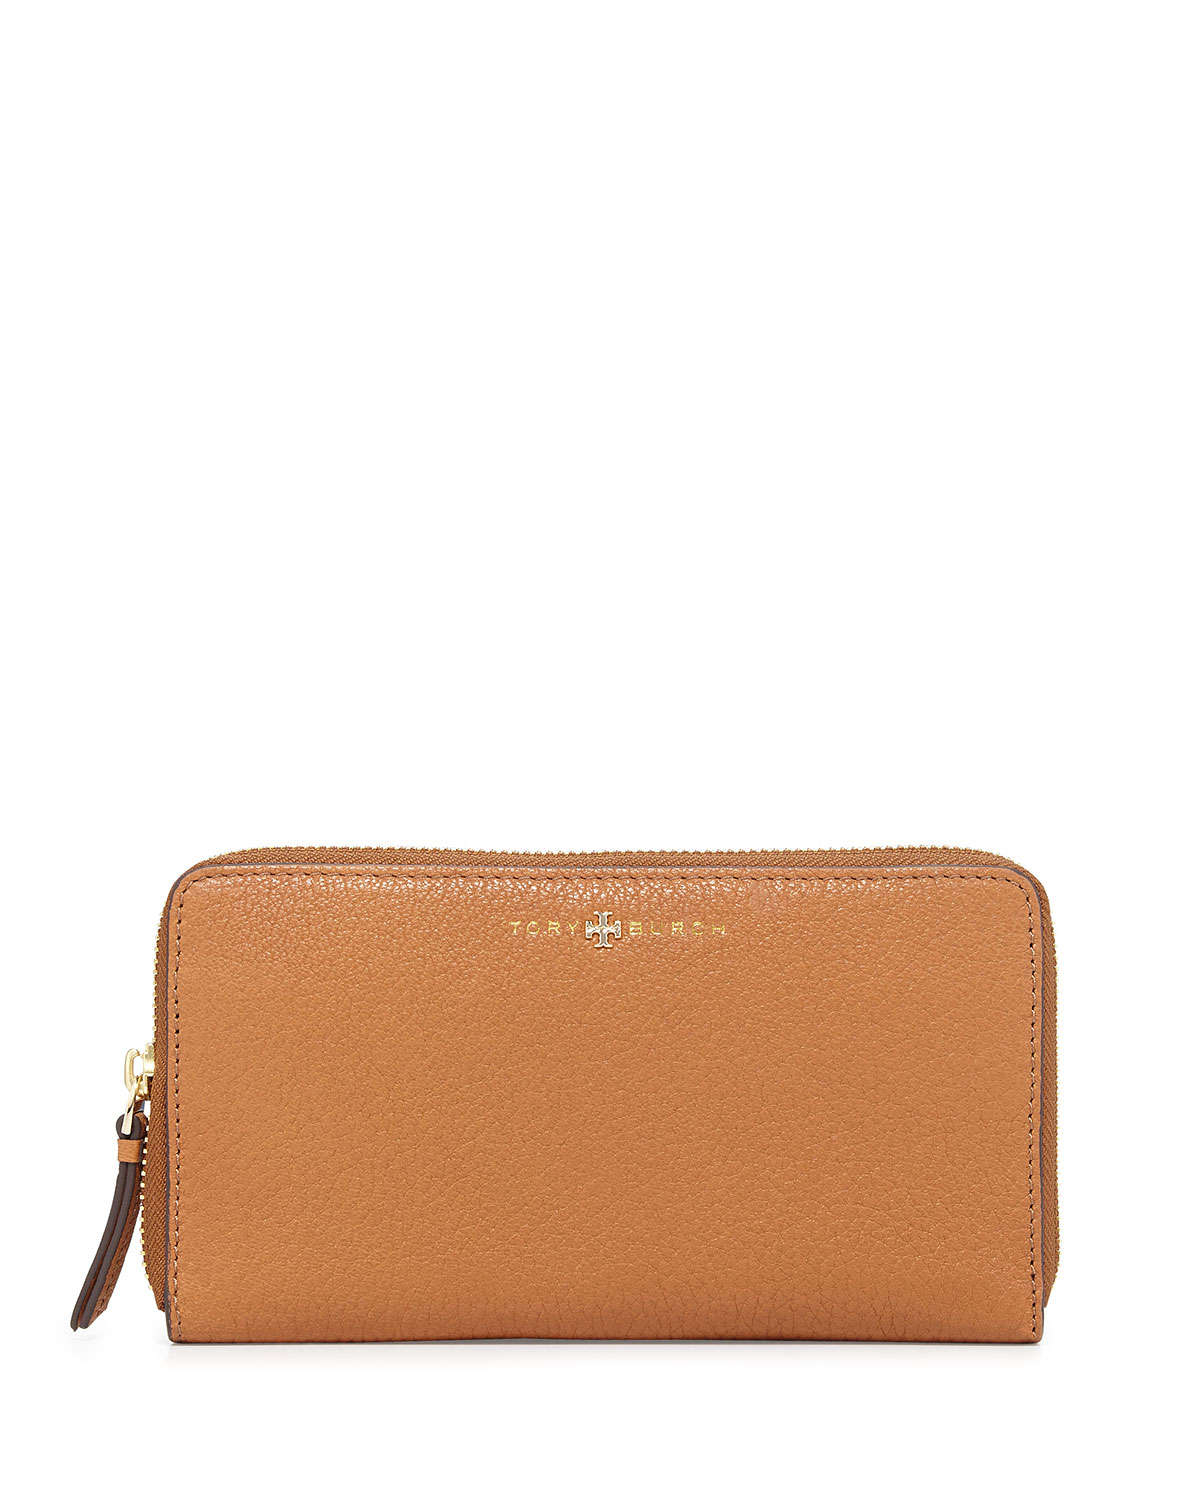 Lyst - Tory Burch Brody Continental Zip Wallet in Brown